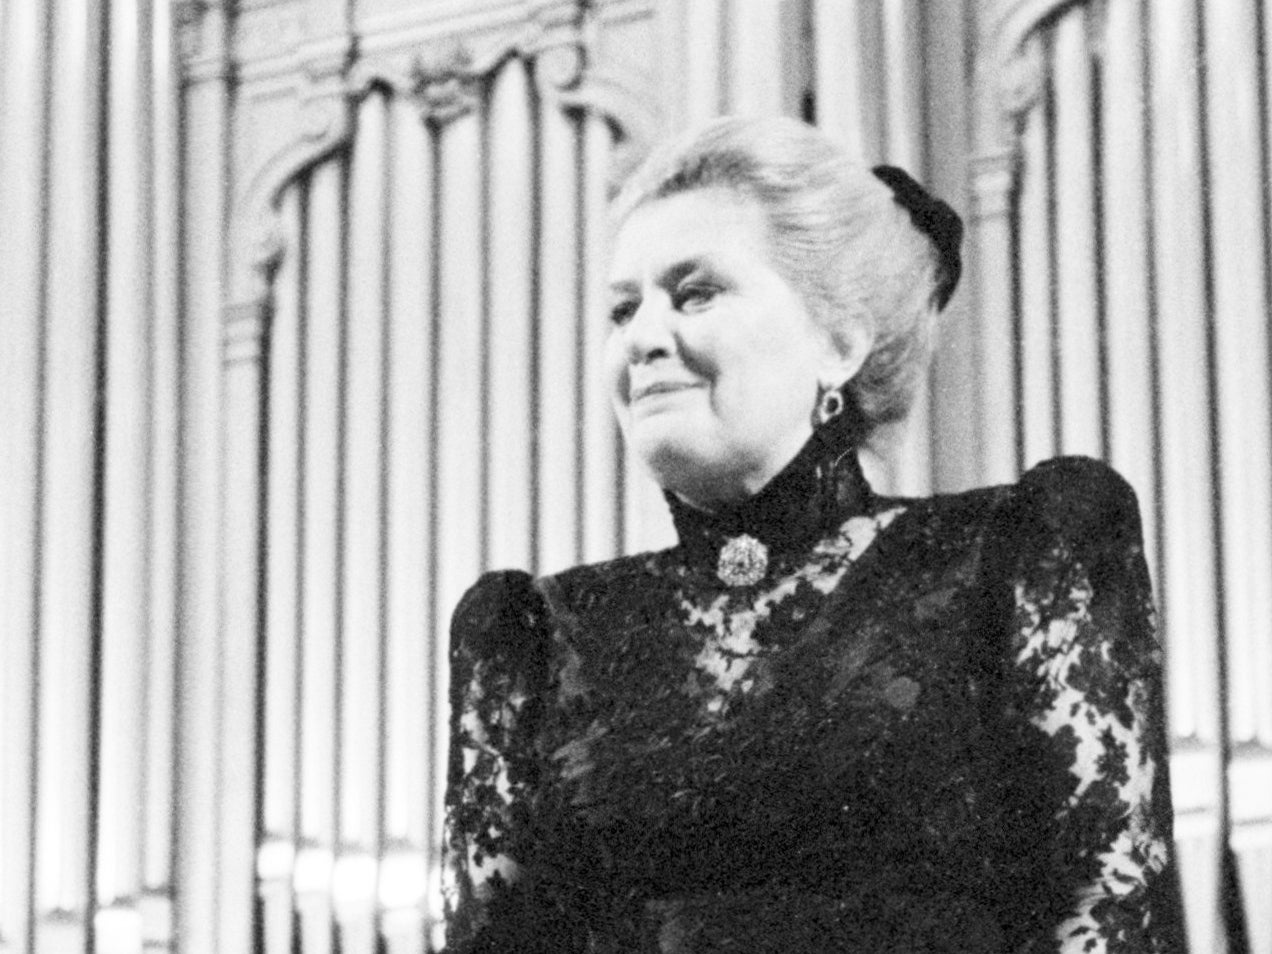 February 25, 1992: Opera singer Elena Obraztsova gets a standing ovation during a performance in the Grand Hall of the State Conservatory in Moscow